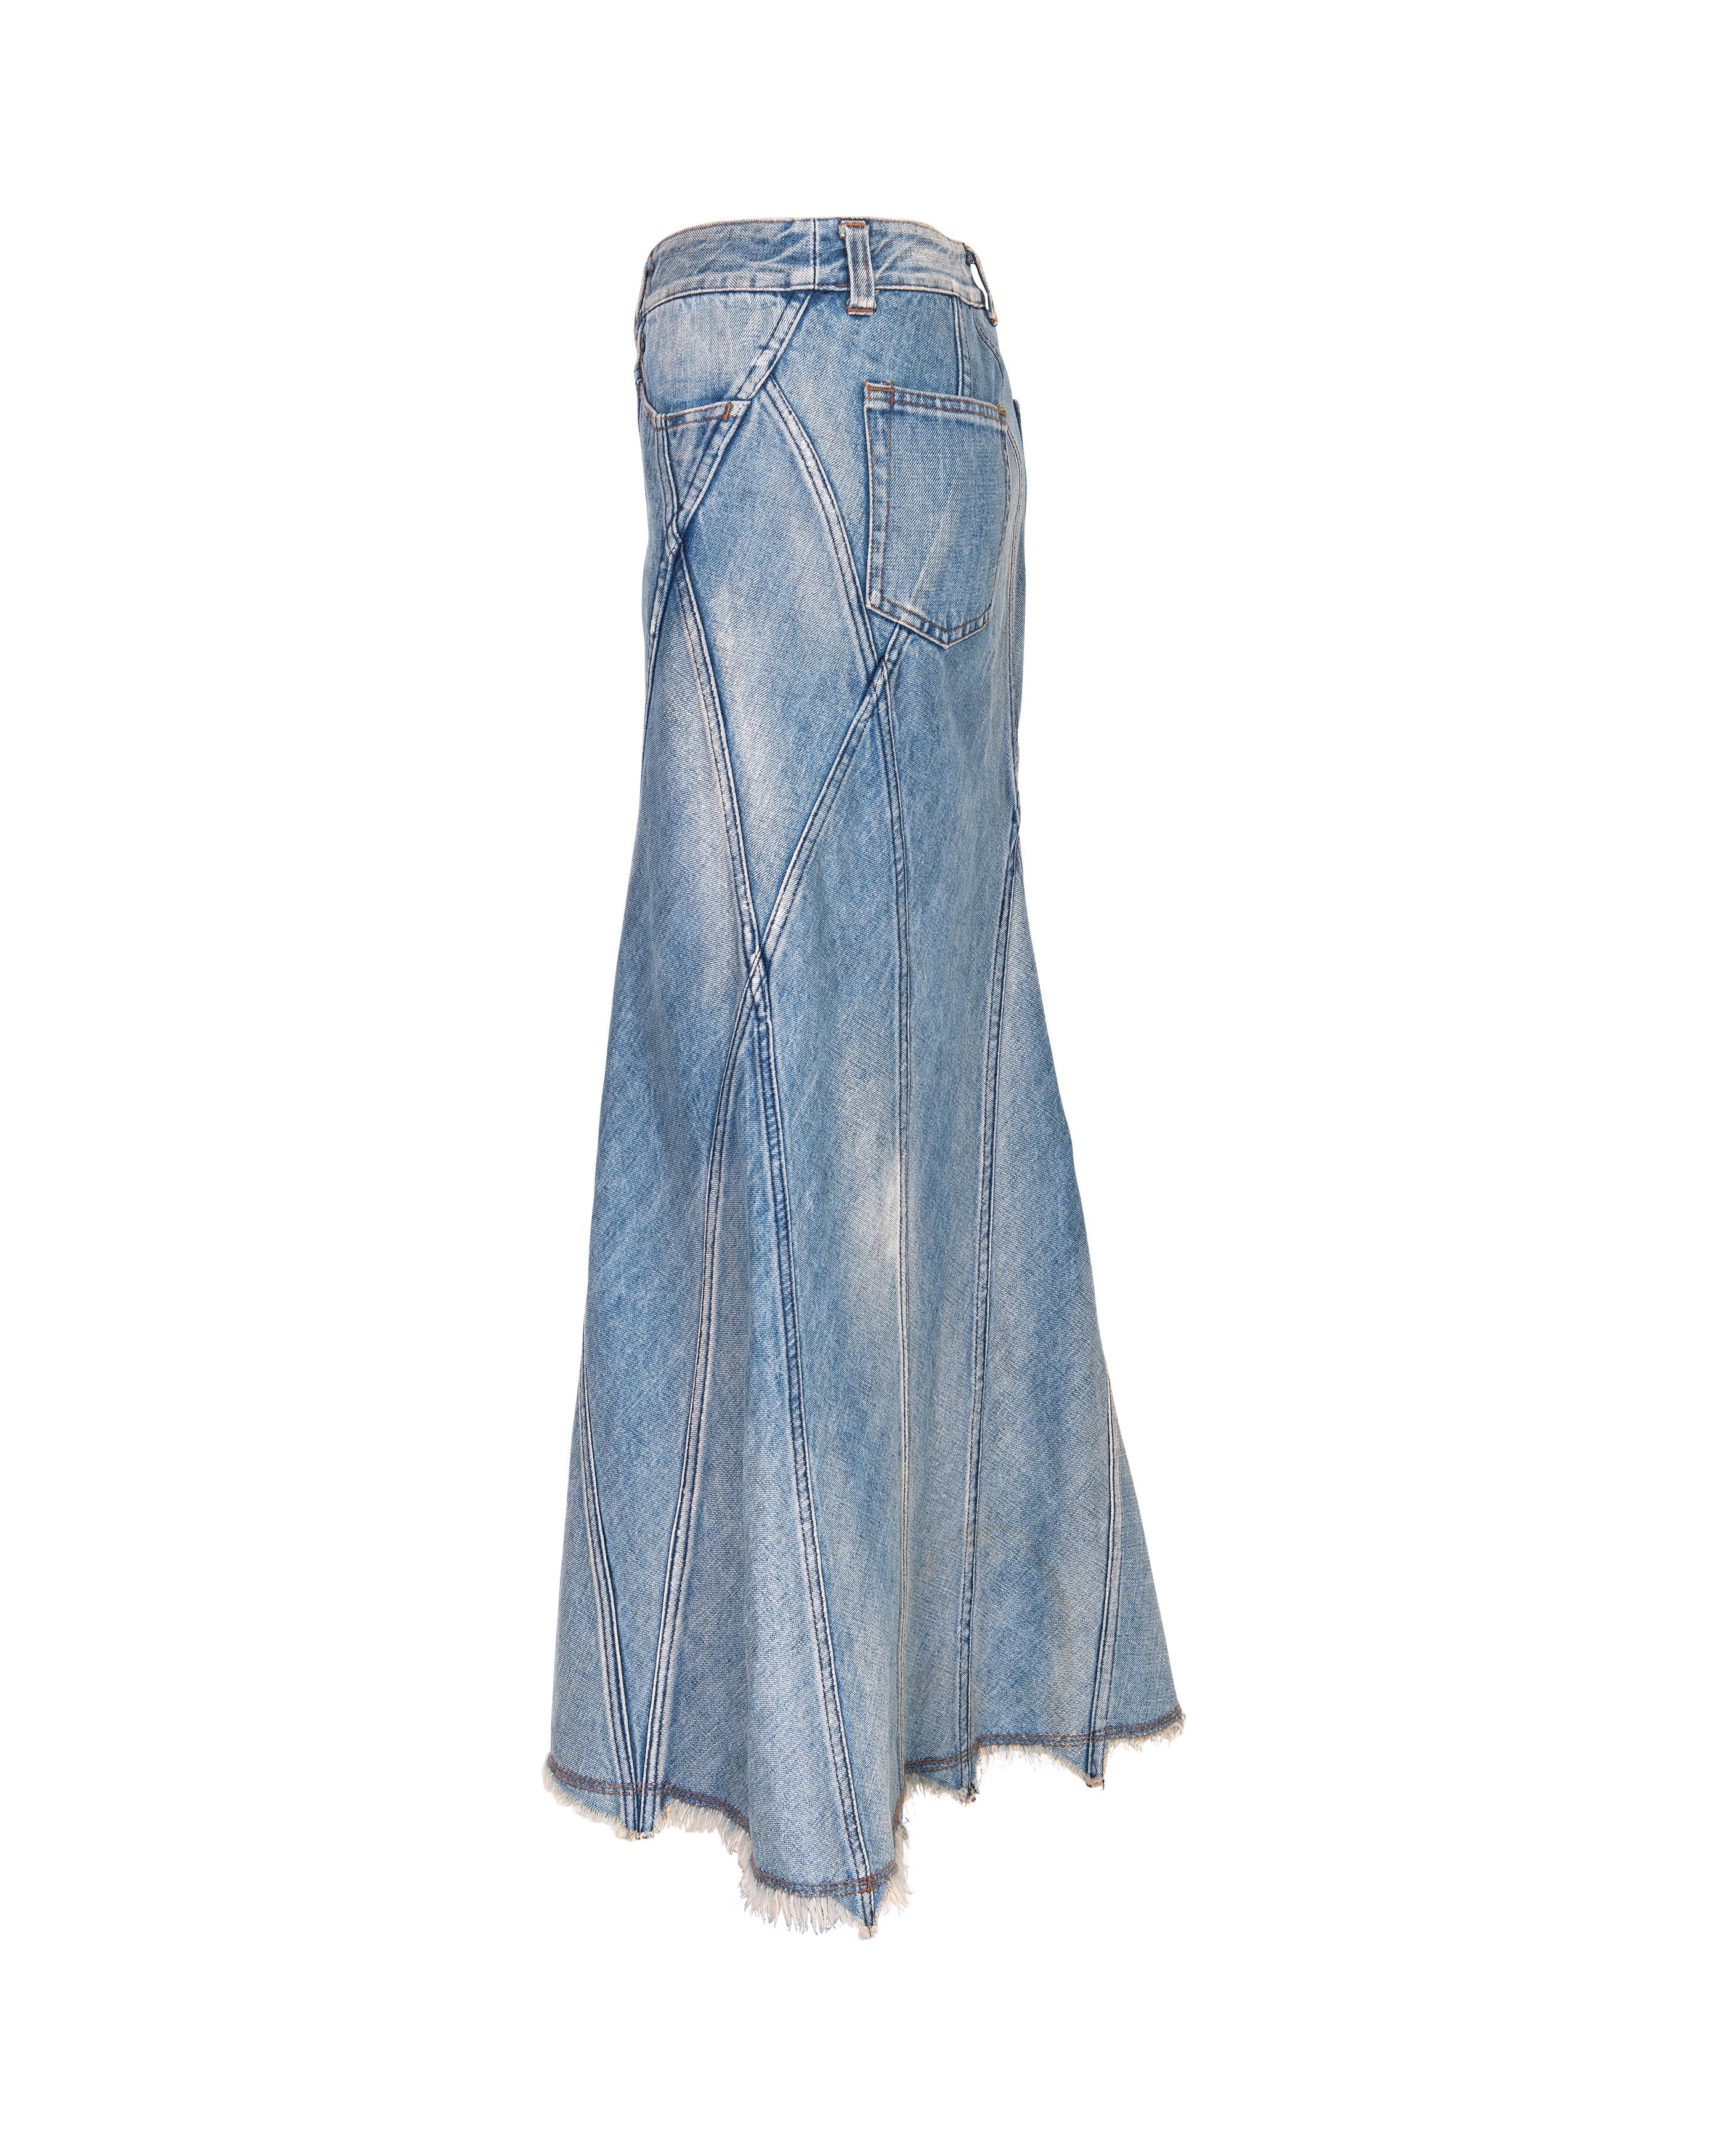 S/S 2002 Junya Watanabe Denim Deconstructed Midi Skirt In Excellent Condition In North Hollywood, CA